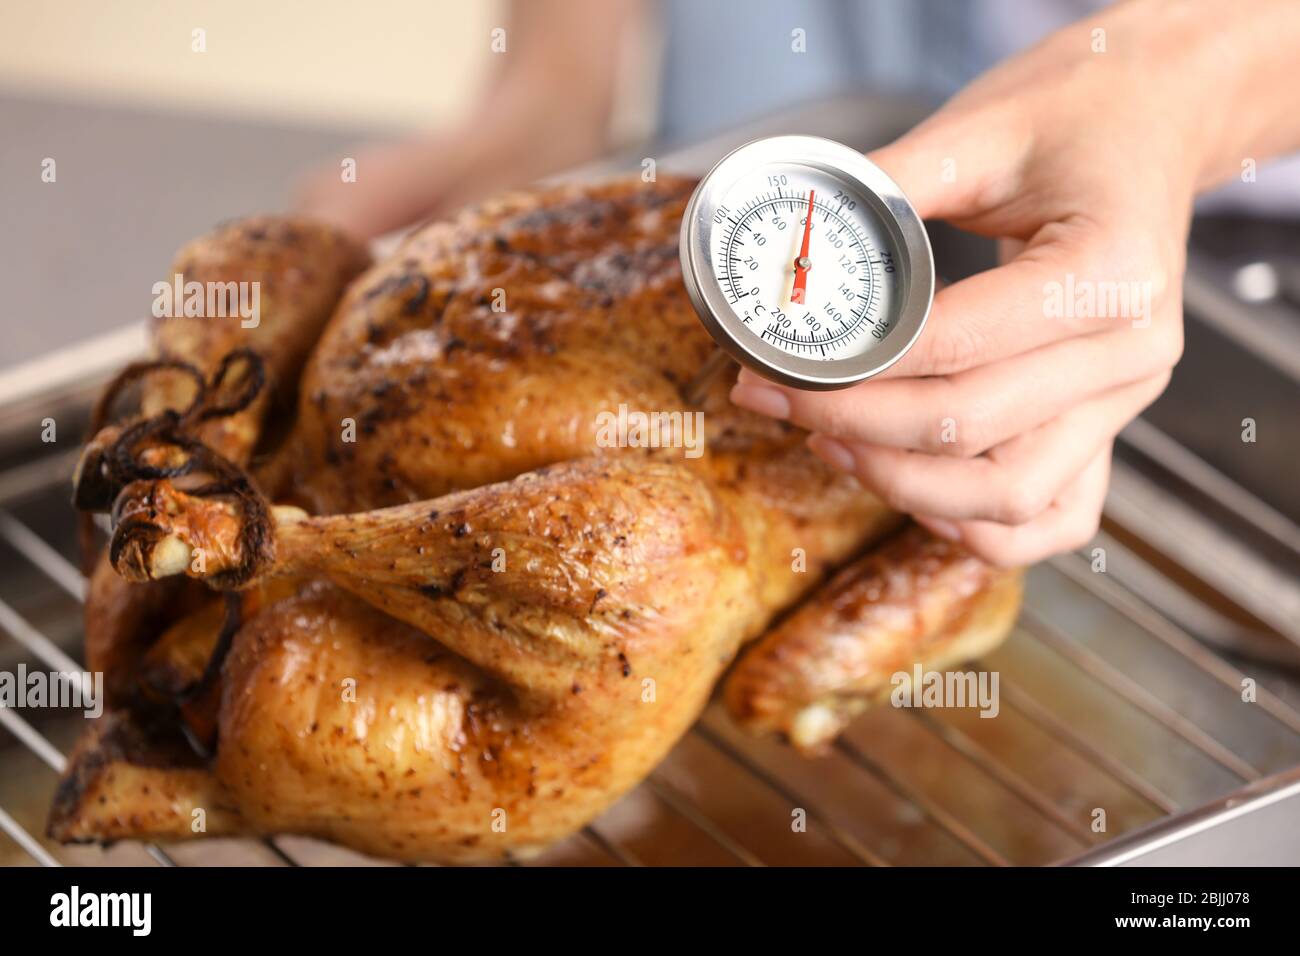 https://c8.alamy.com/comp/2BJJ078/young-woman-measuring-temperature-of-whole-roasted-turkey-with-meat-thermometer-2BJJ078.jpg